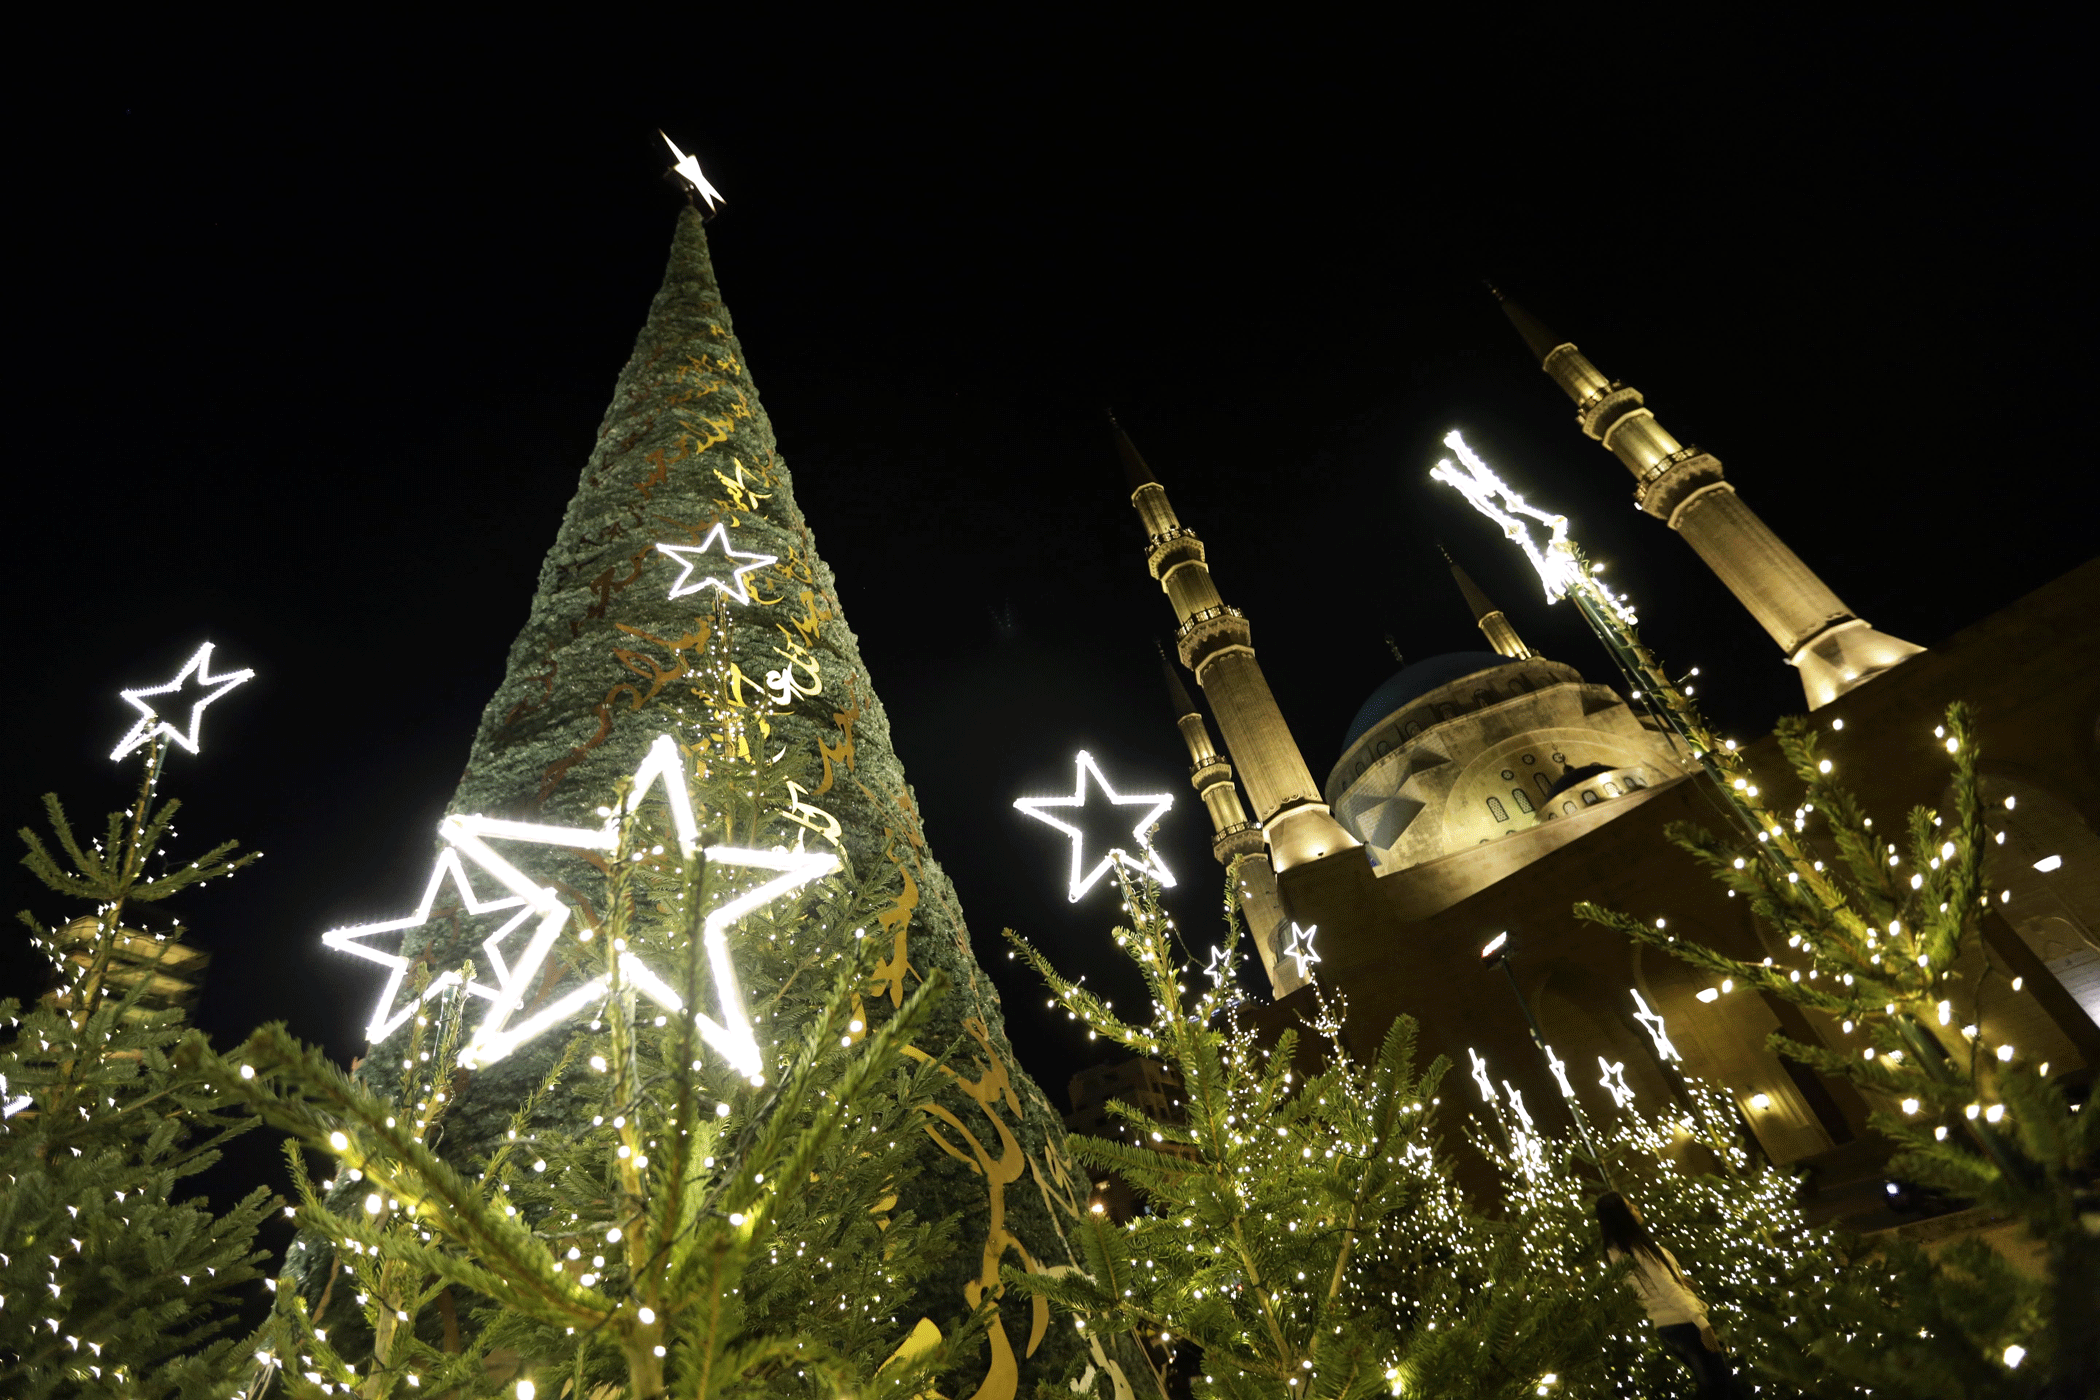 A Christmas tree is illuminated in front of the al-Amin Mosque on Martyrs' Square in Beirut on Dec. 11, 2015. (Photo by Ratib Al Safadi/Anadolu Agency/Getty Images)